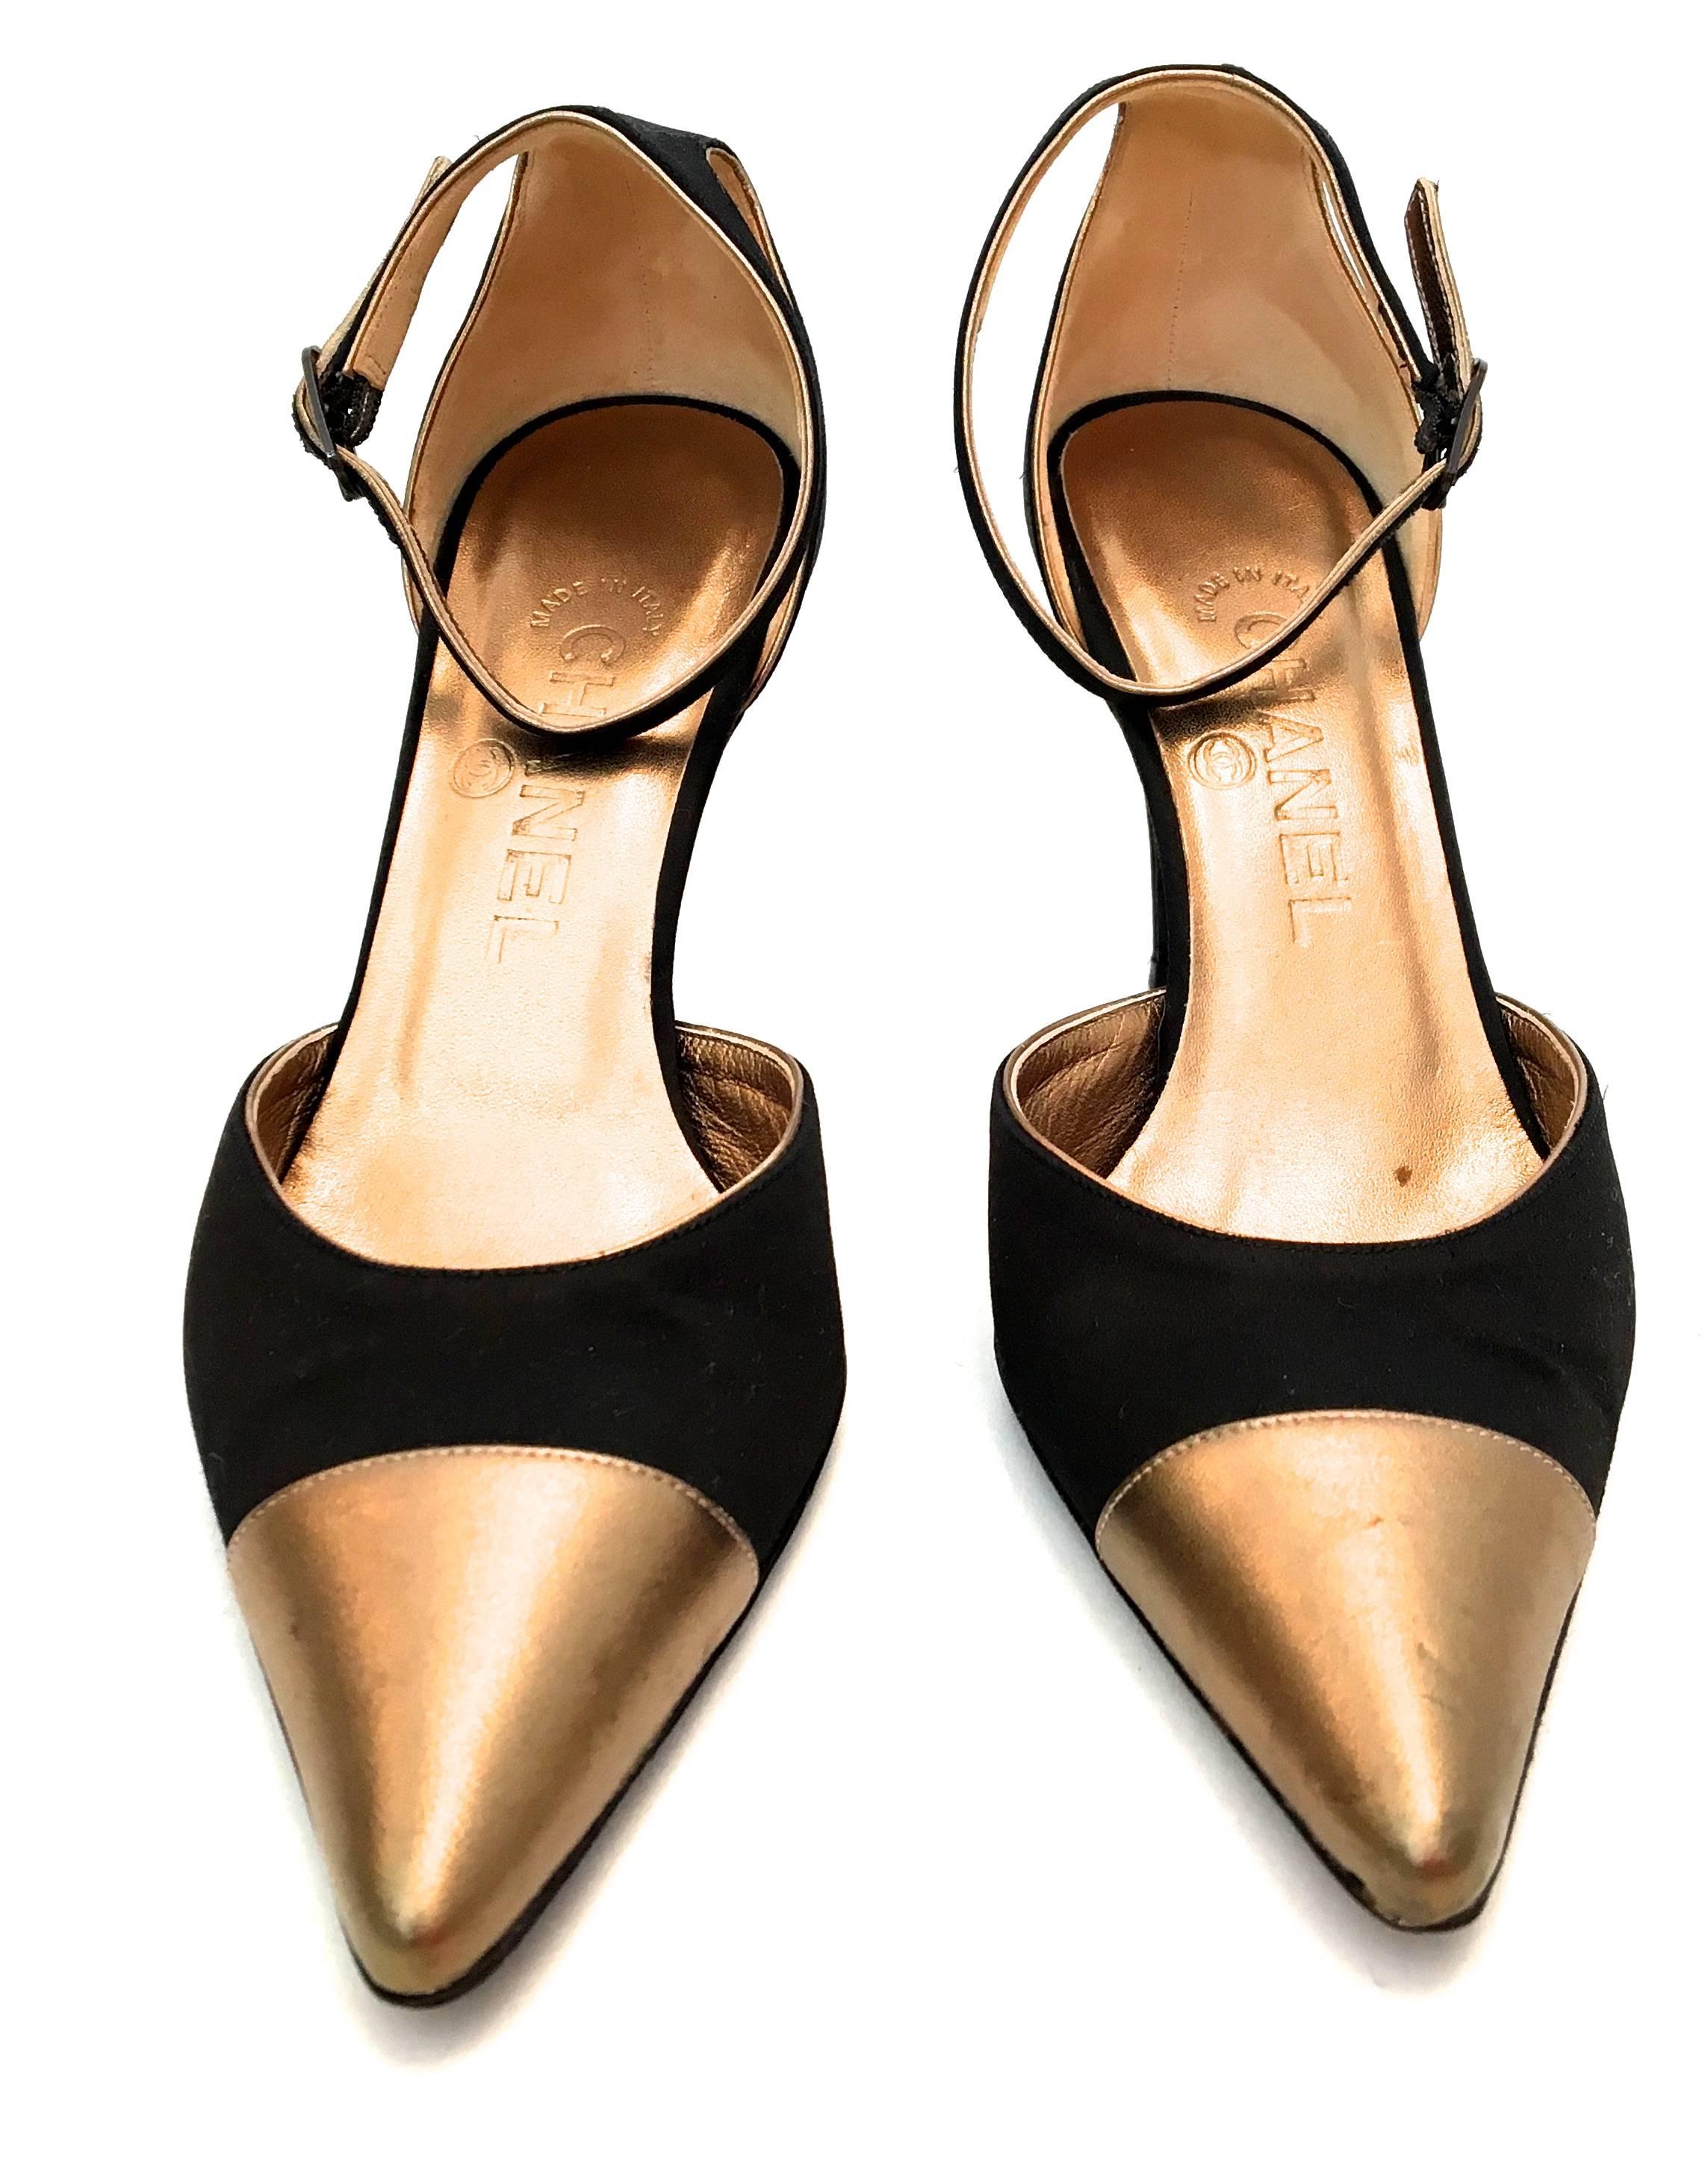 Brown Chanel Shoes - Black and Gold Heels - Size 37.5  For Sale